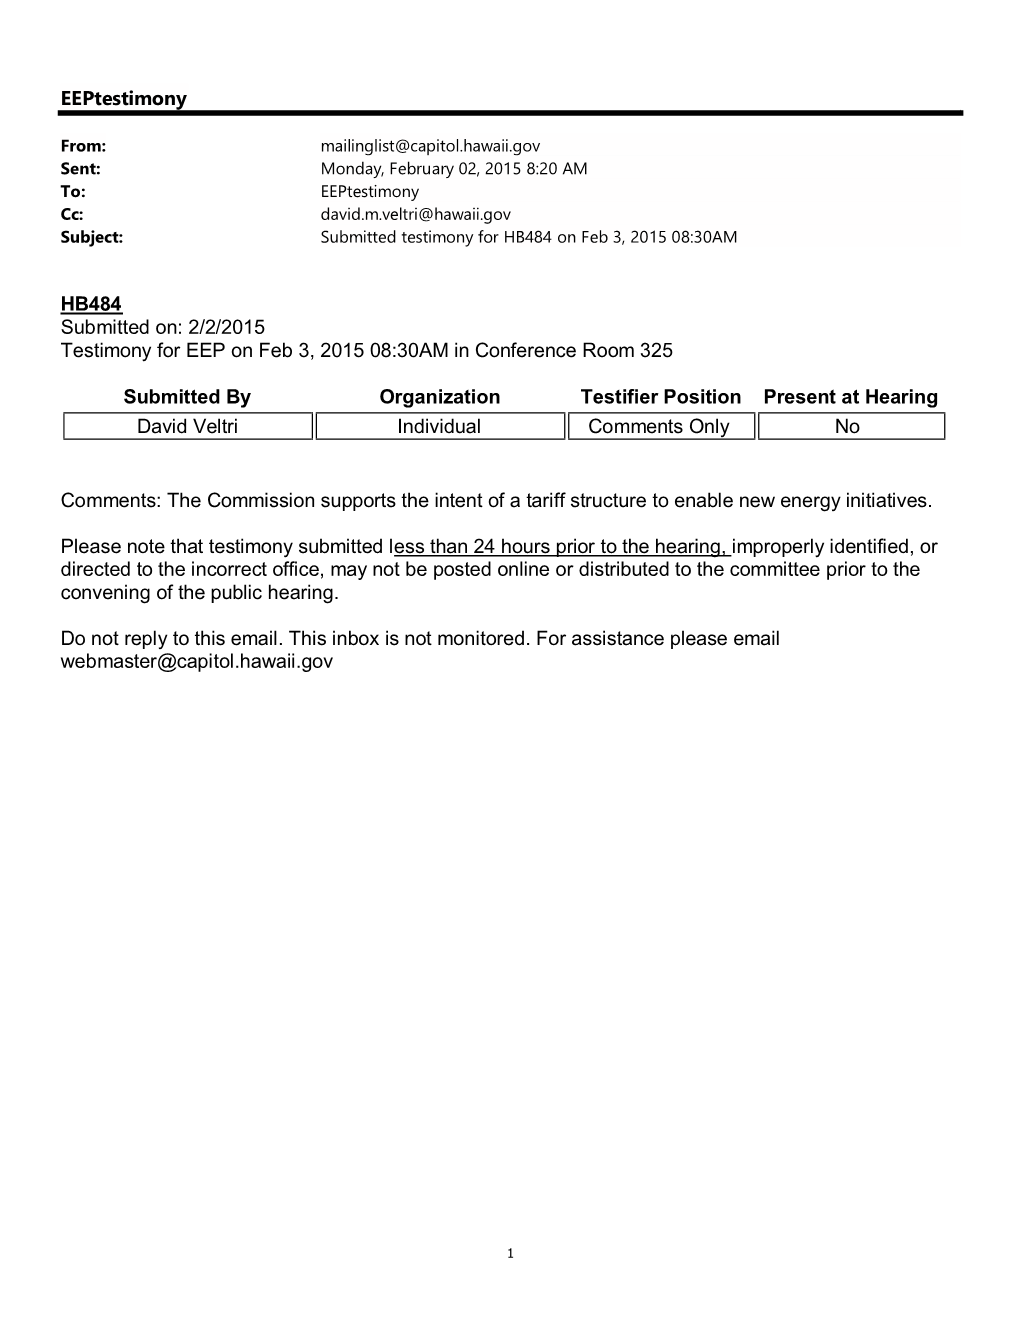 Eeptestimony HB484 Submitted On: 2/2/2015 Testimony for EEP on Feb 3, 2015 08:30AM in Conference Room 325 Submitted by Organizat